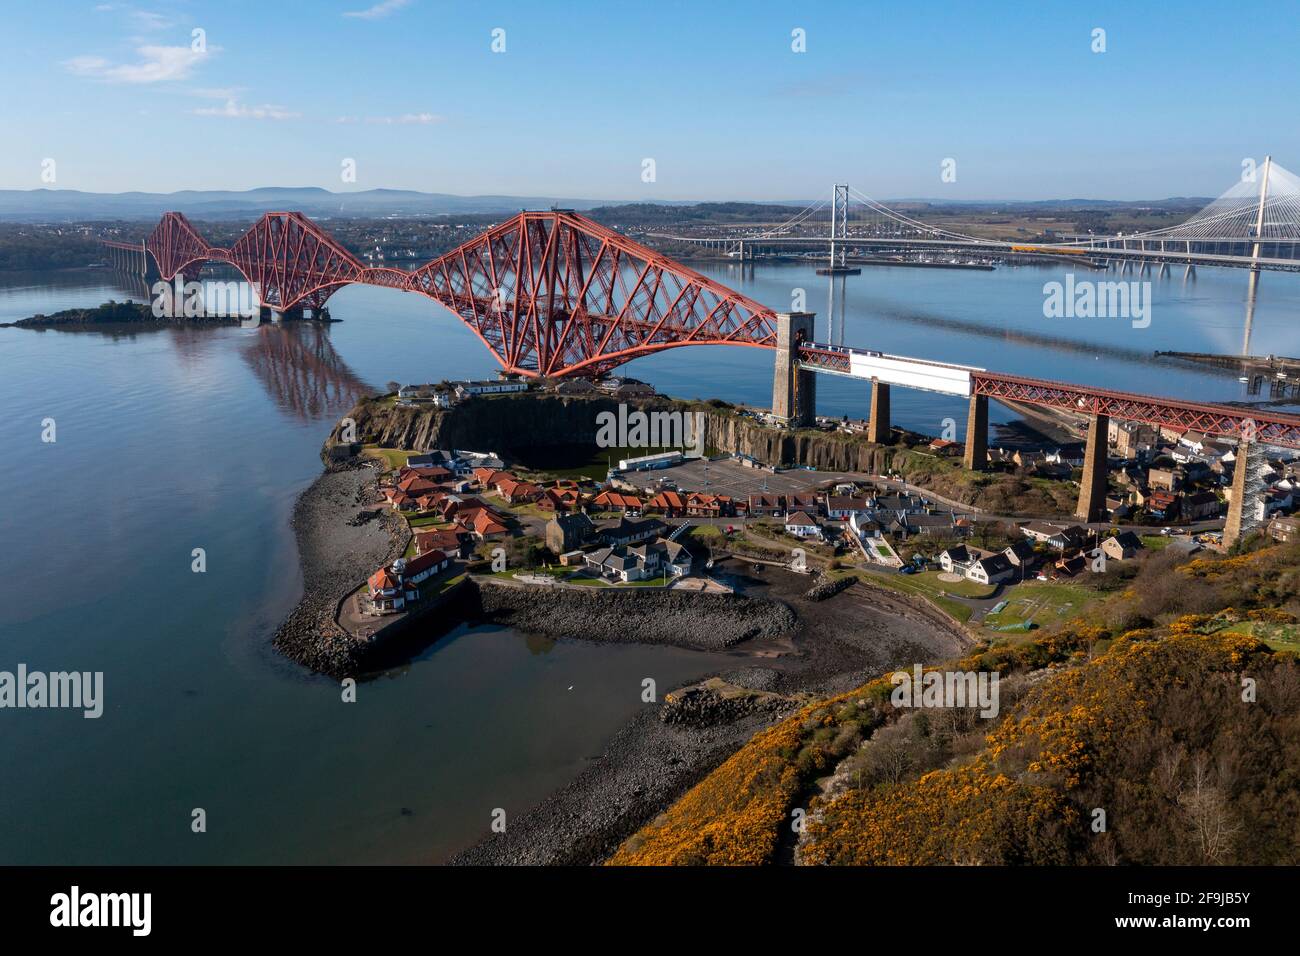 Aerial view of the Forth Rail Bridge at North Queensferry. The bridge completed in 1889 spans the Firth of Forth between North and South Queensferry. Stock Photo